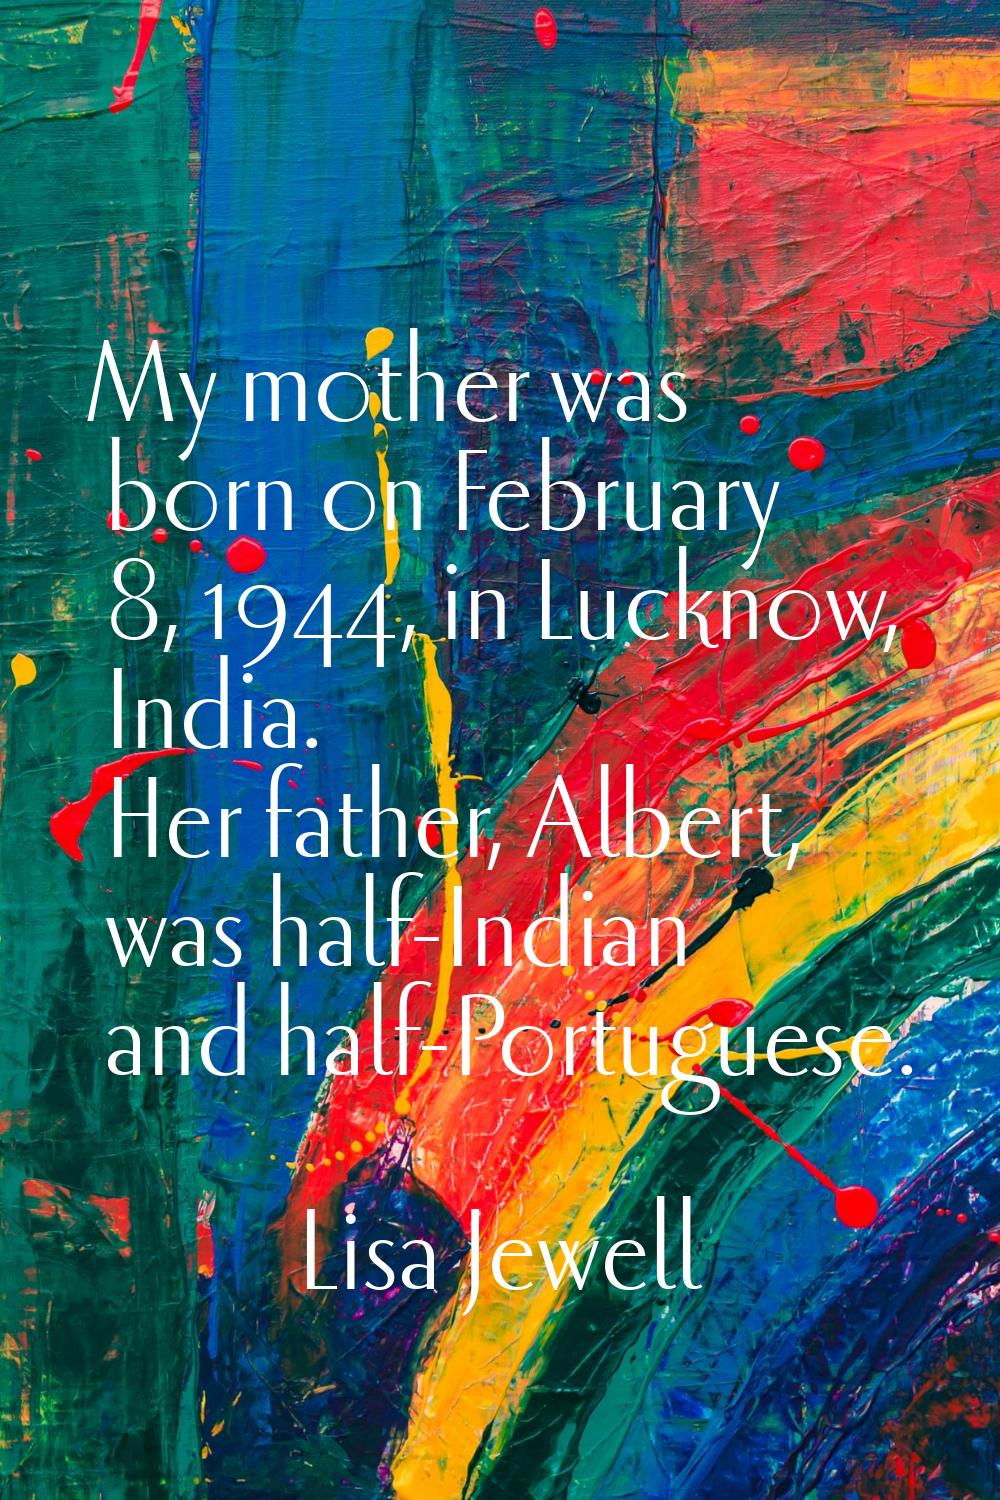 My mother was born on February 8, 1944, in Lucknow, India. Her father, Albert, was half-Indian and 